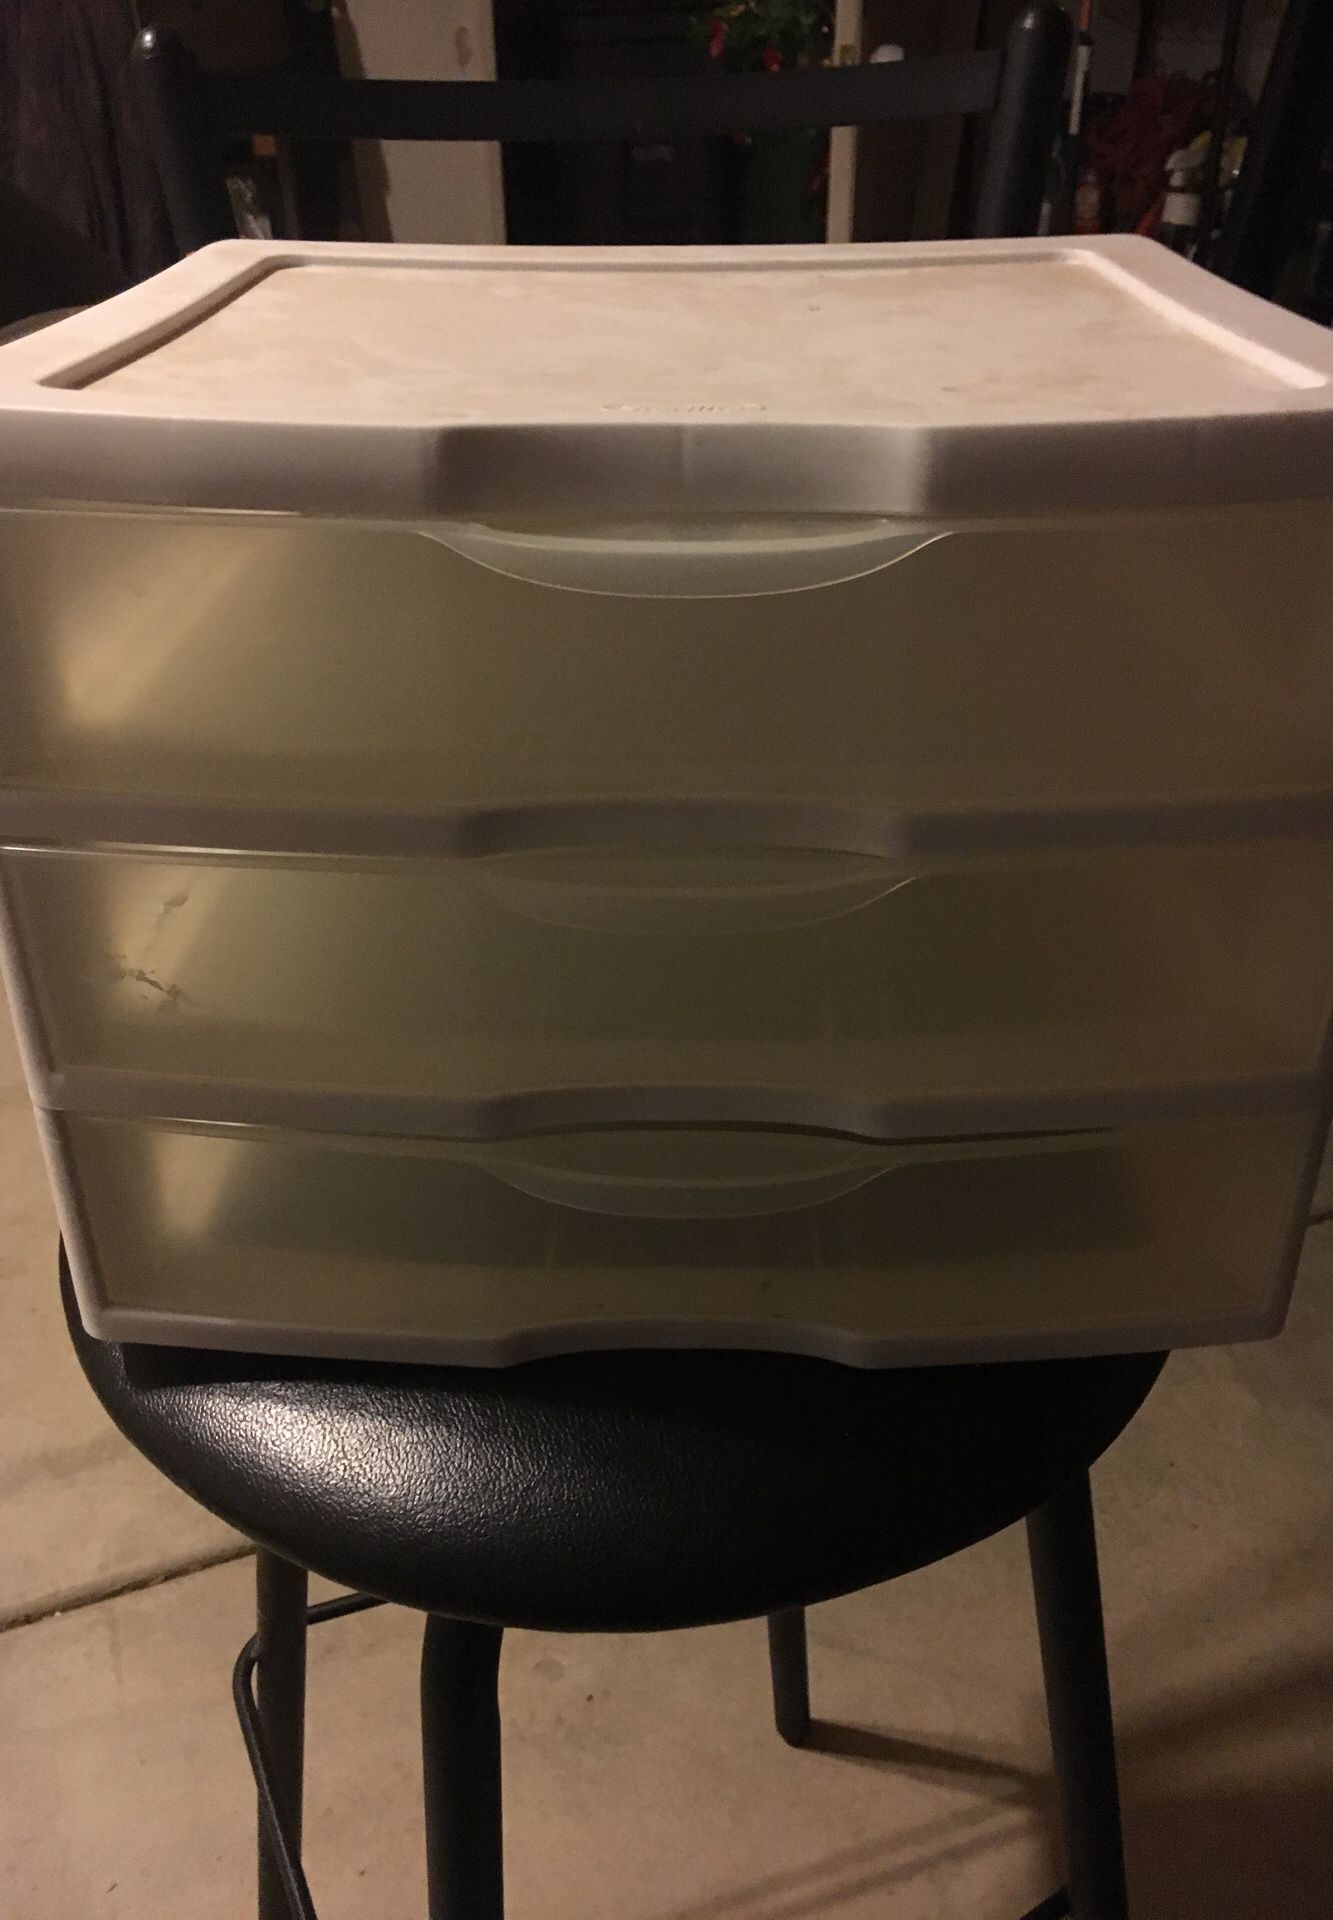 Small 3 drawer plastic container used $3